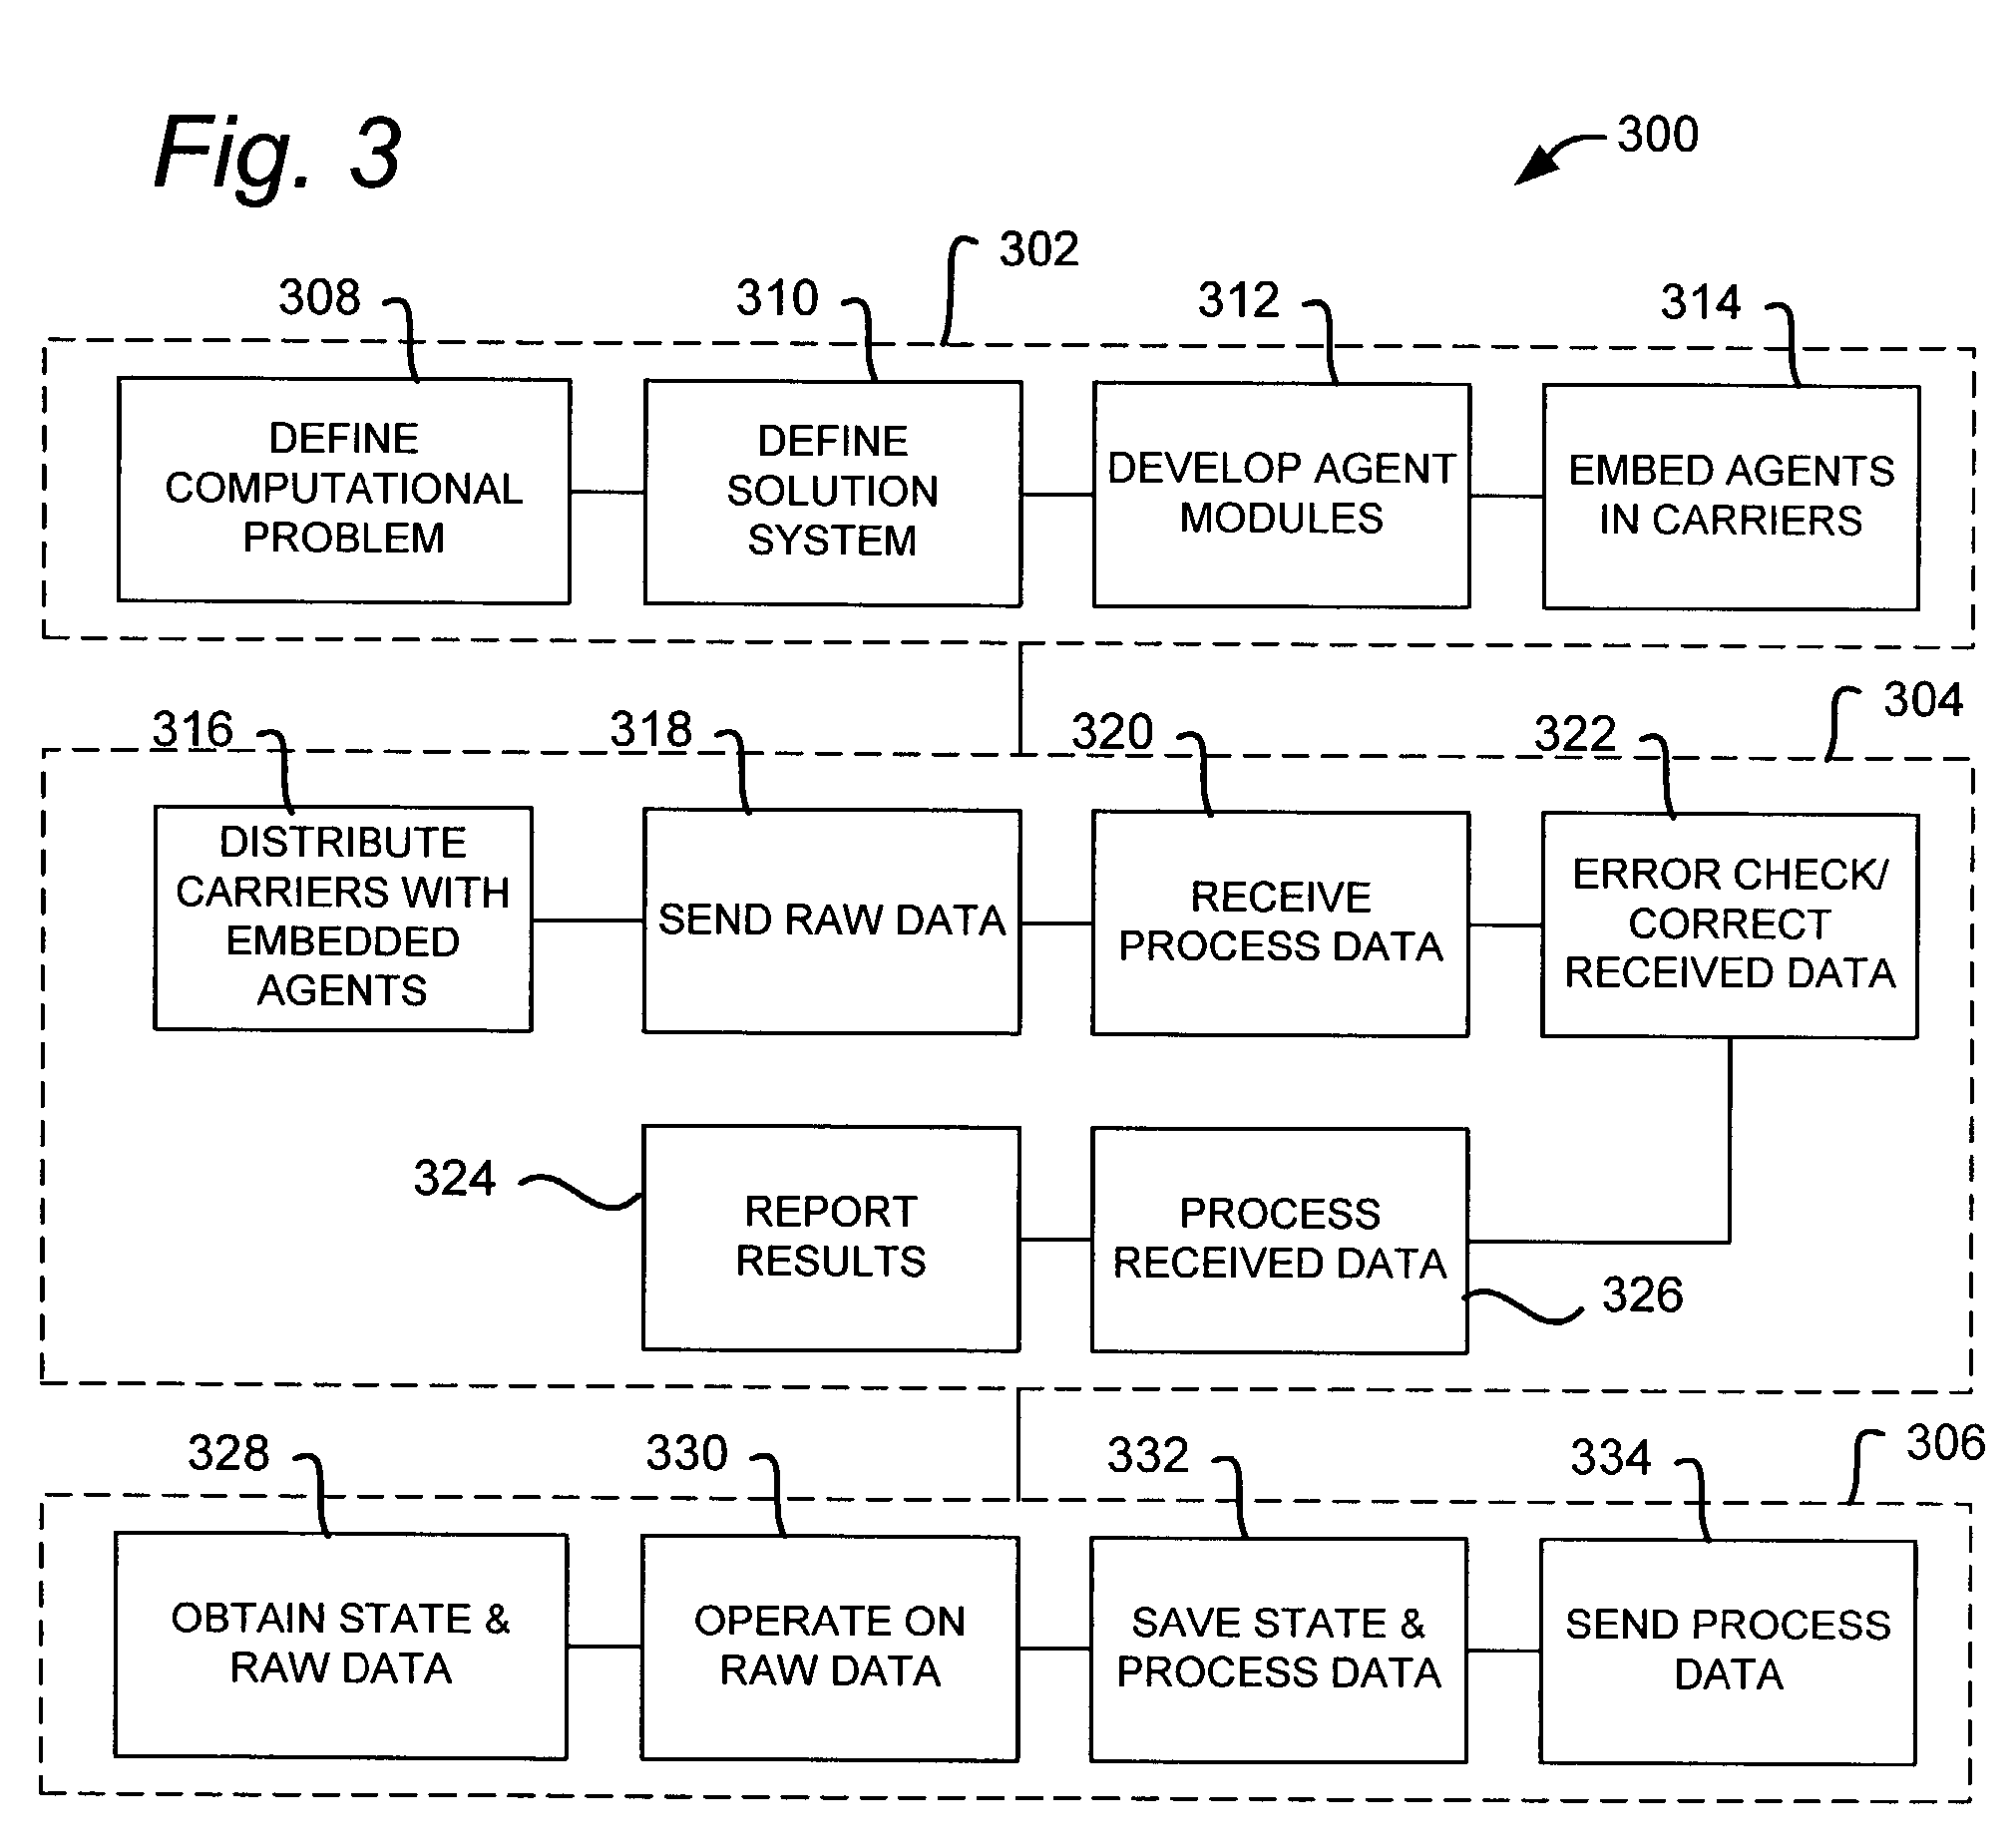 Distributed computing using agent embedded in content unrelated to agent's processing function